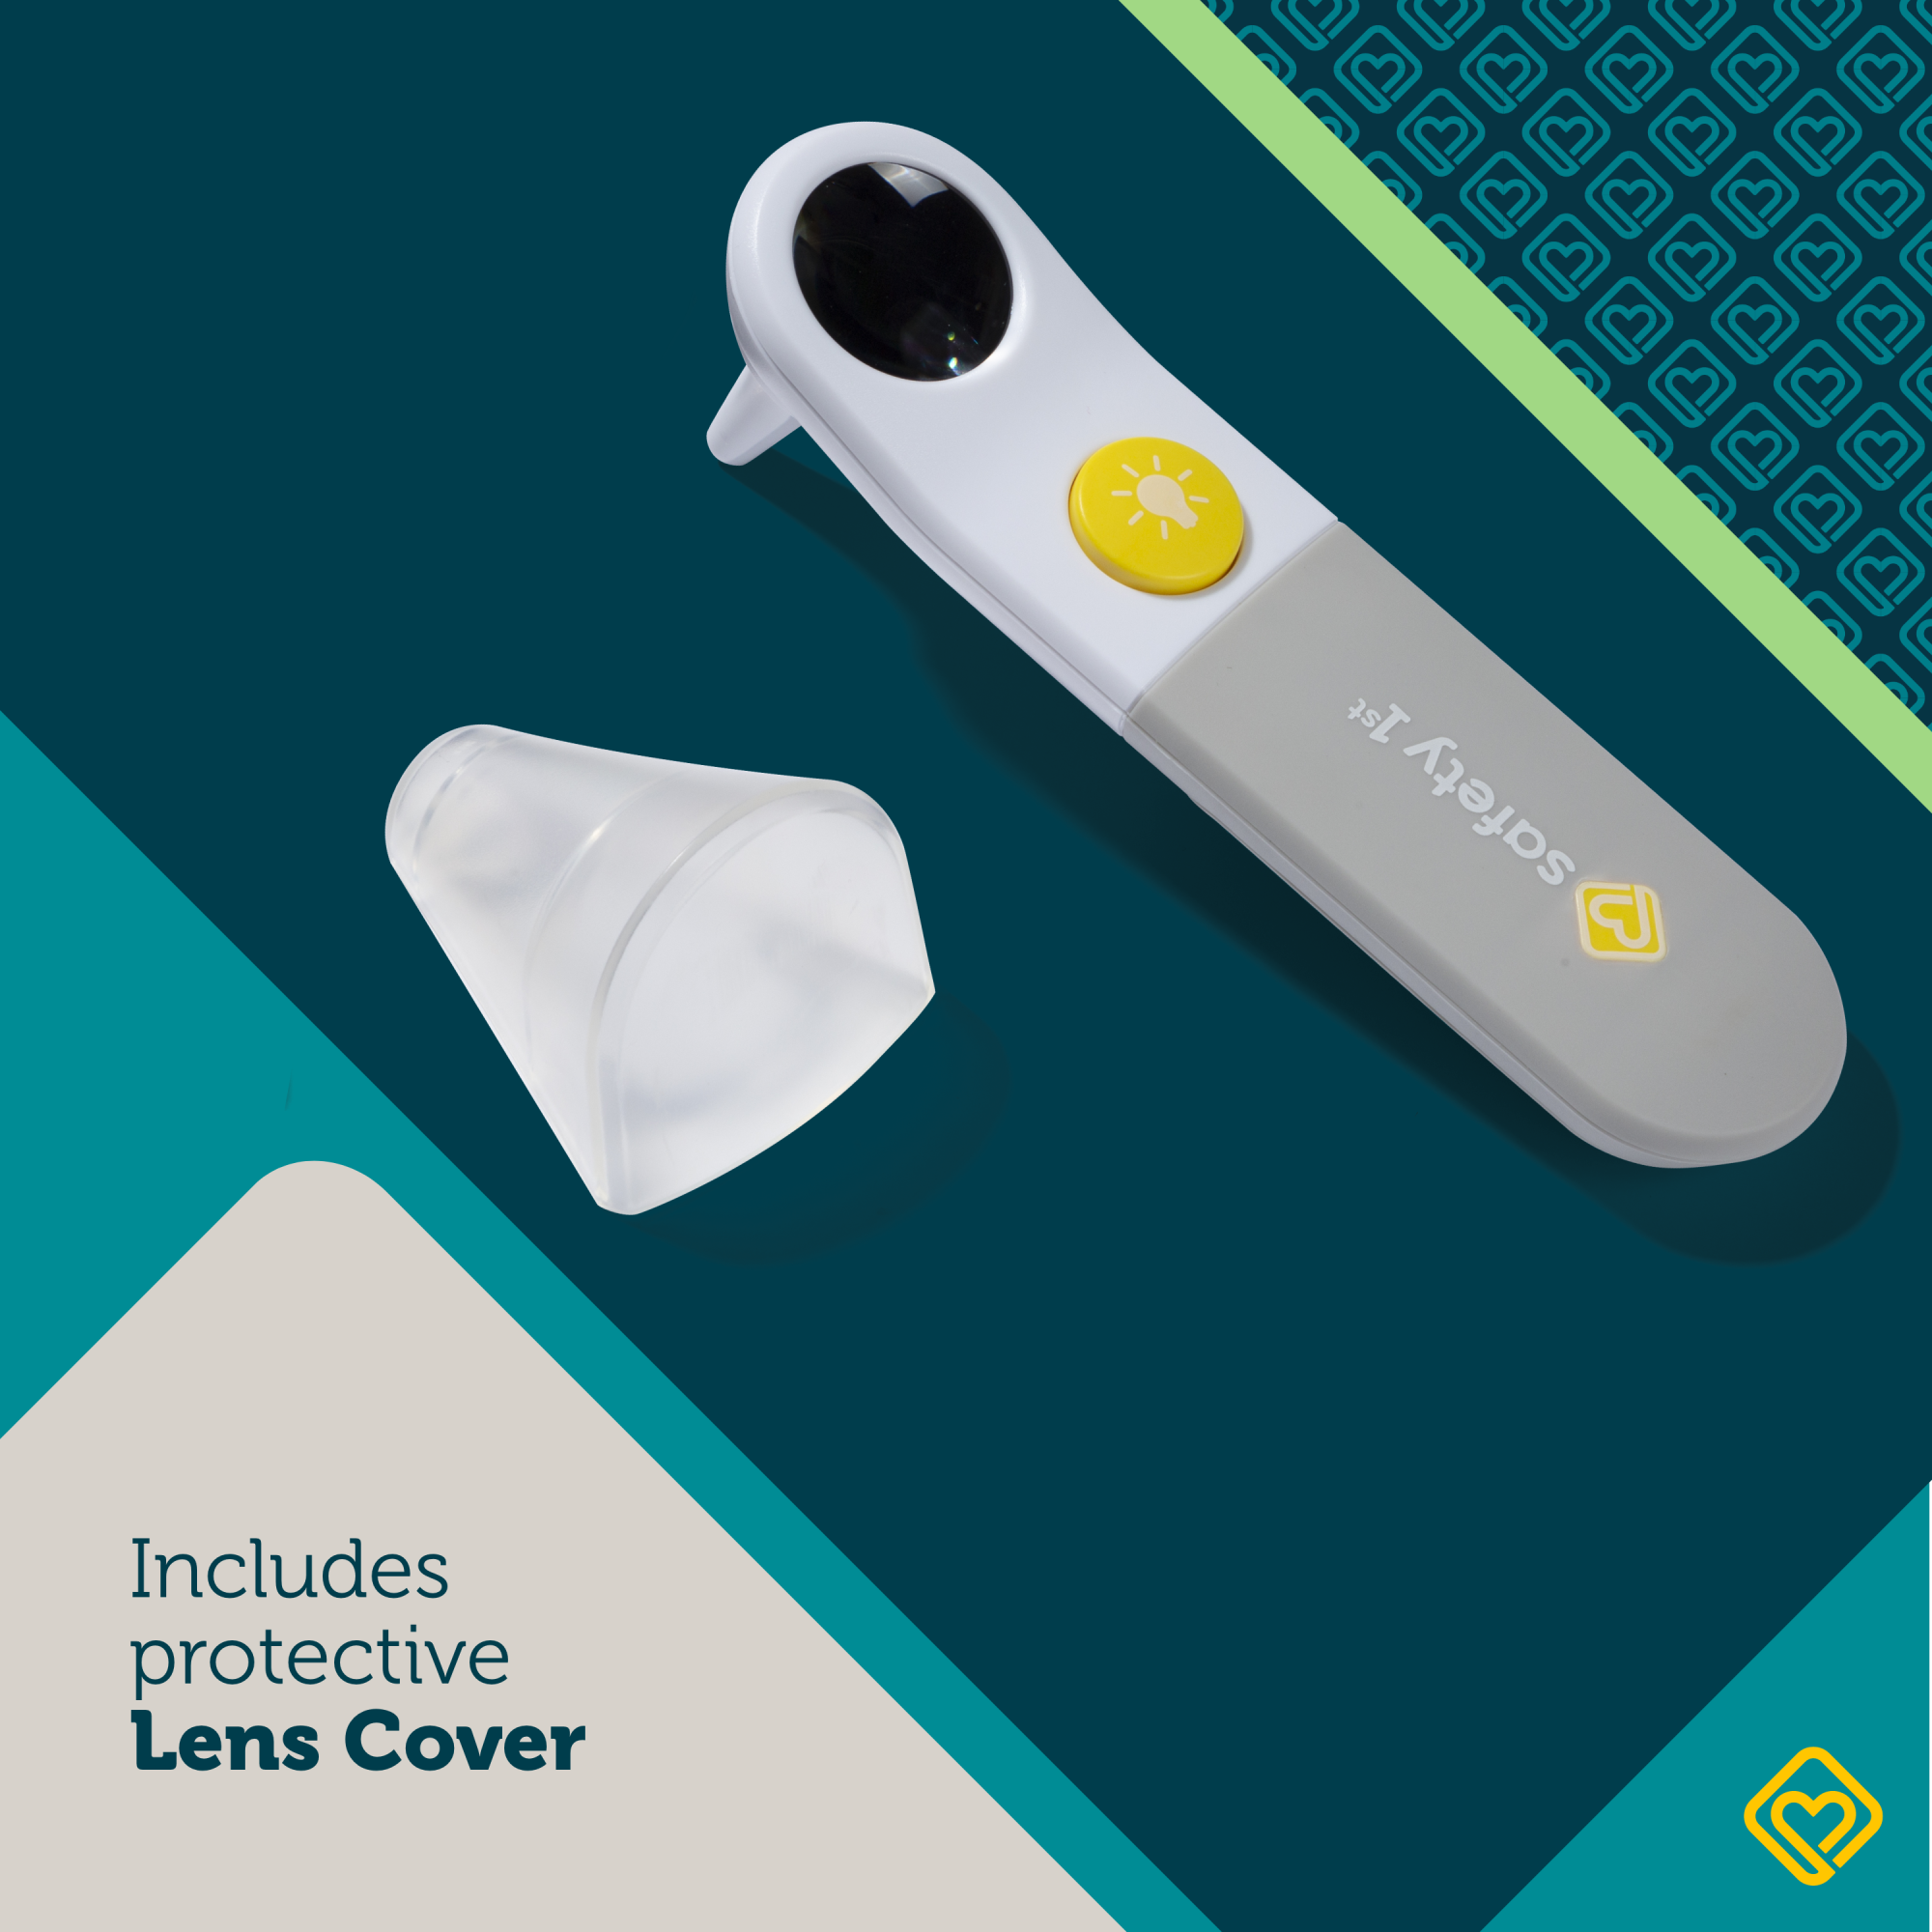 Ear Otoscope in packaging - includes protective lens cover